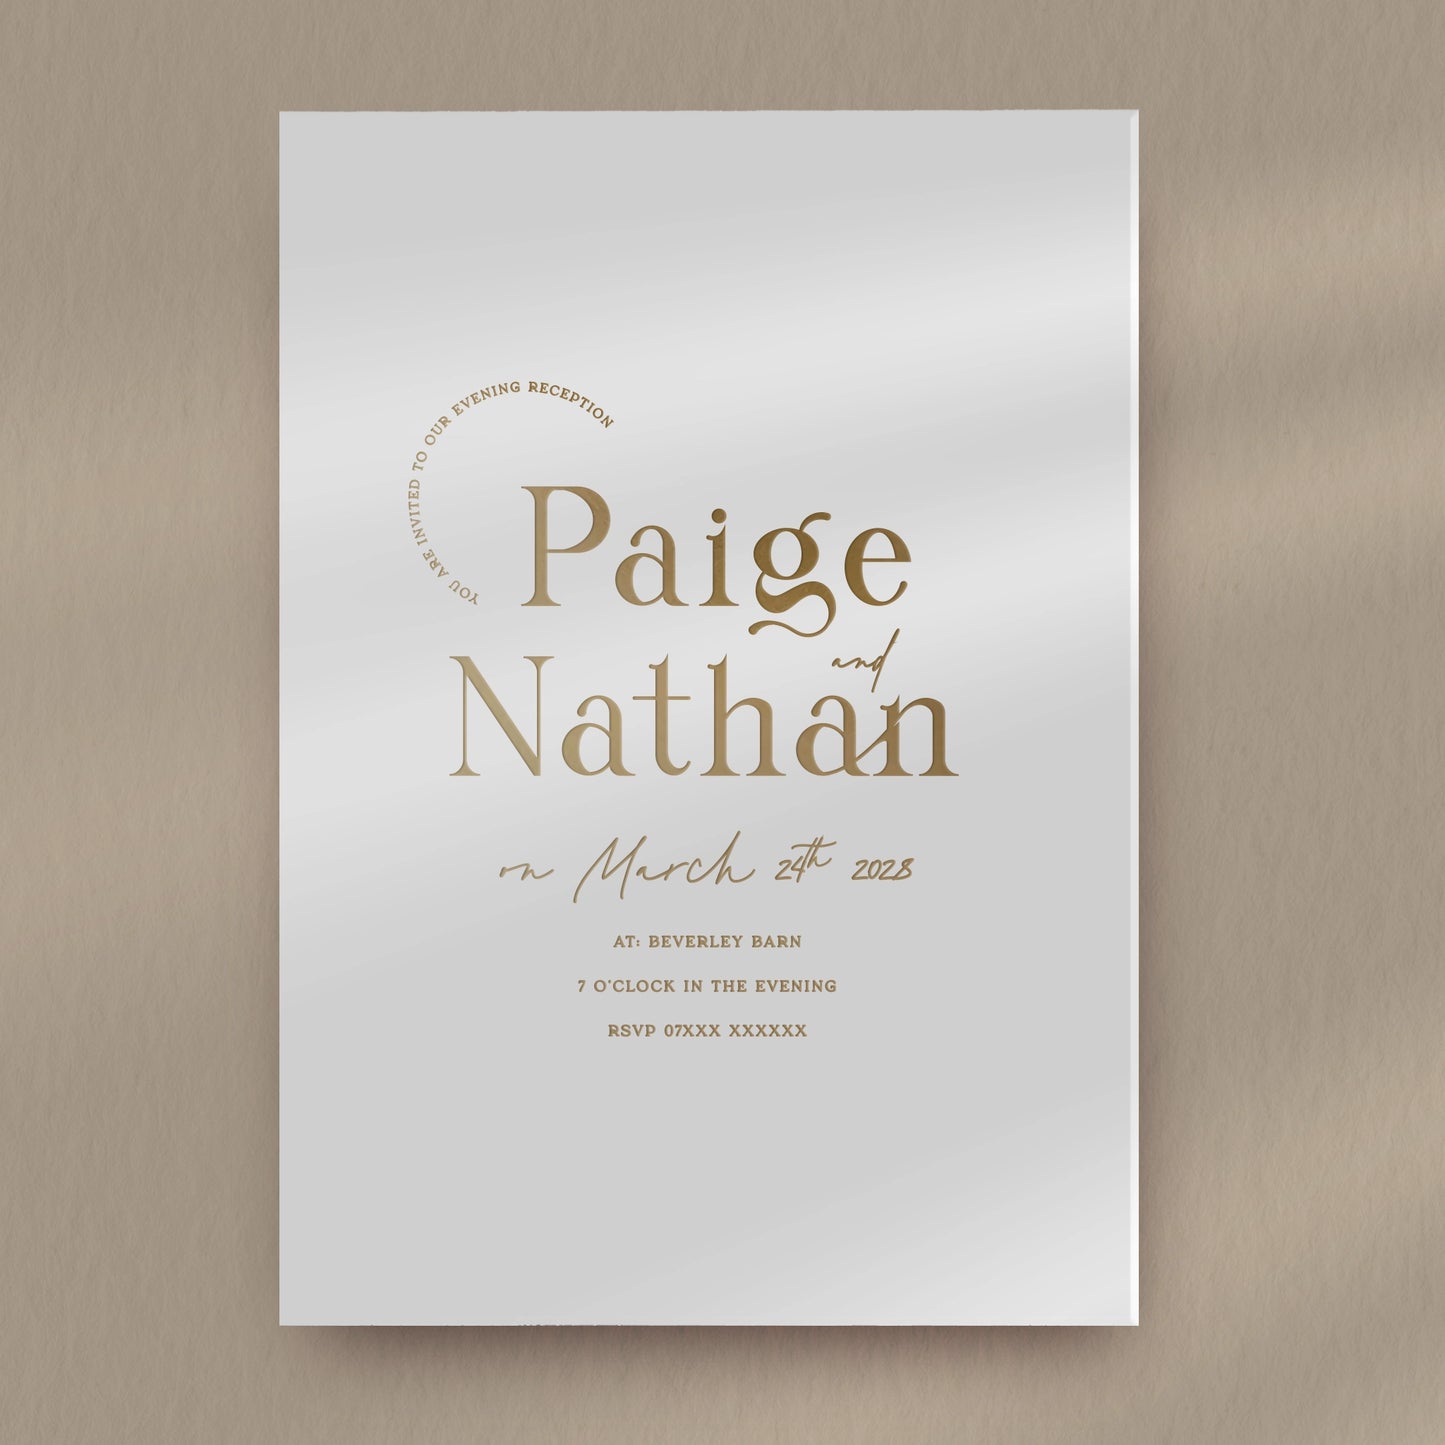 Evening Invitation Sample  Ivy and Gold Wedding Stationery Paige  